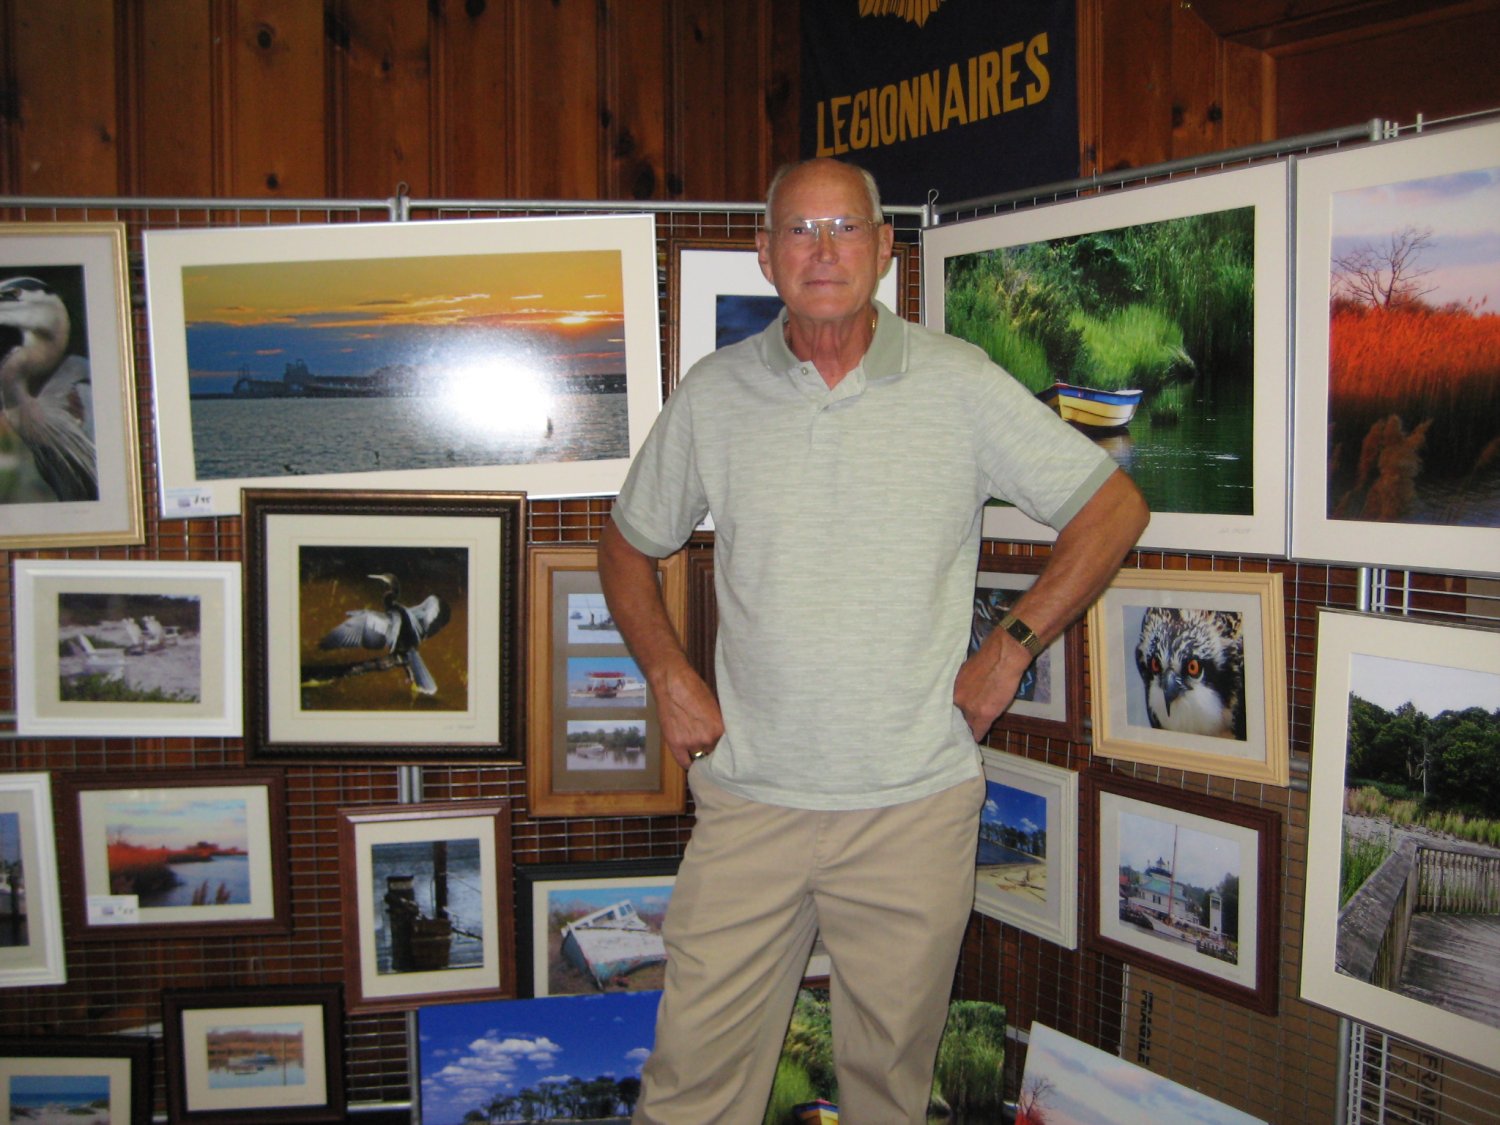  John Frichett and his stunning Eastern Shore Photography, Scenes, and Wildlife.  